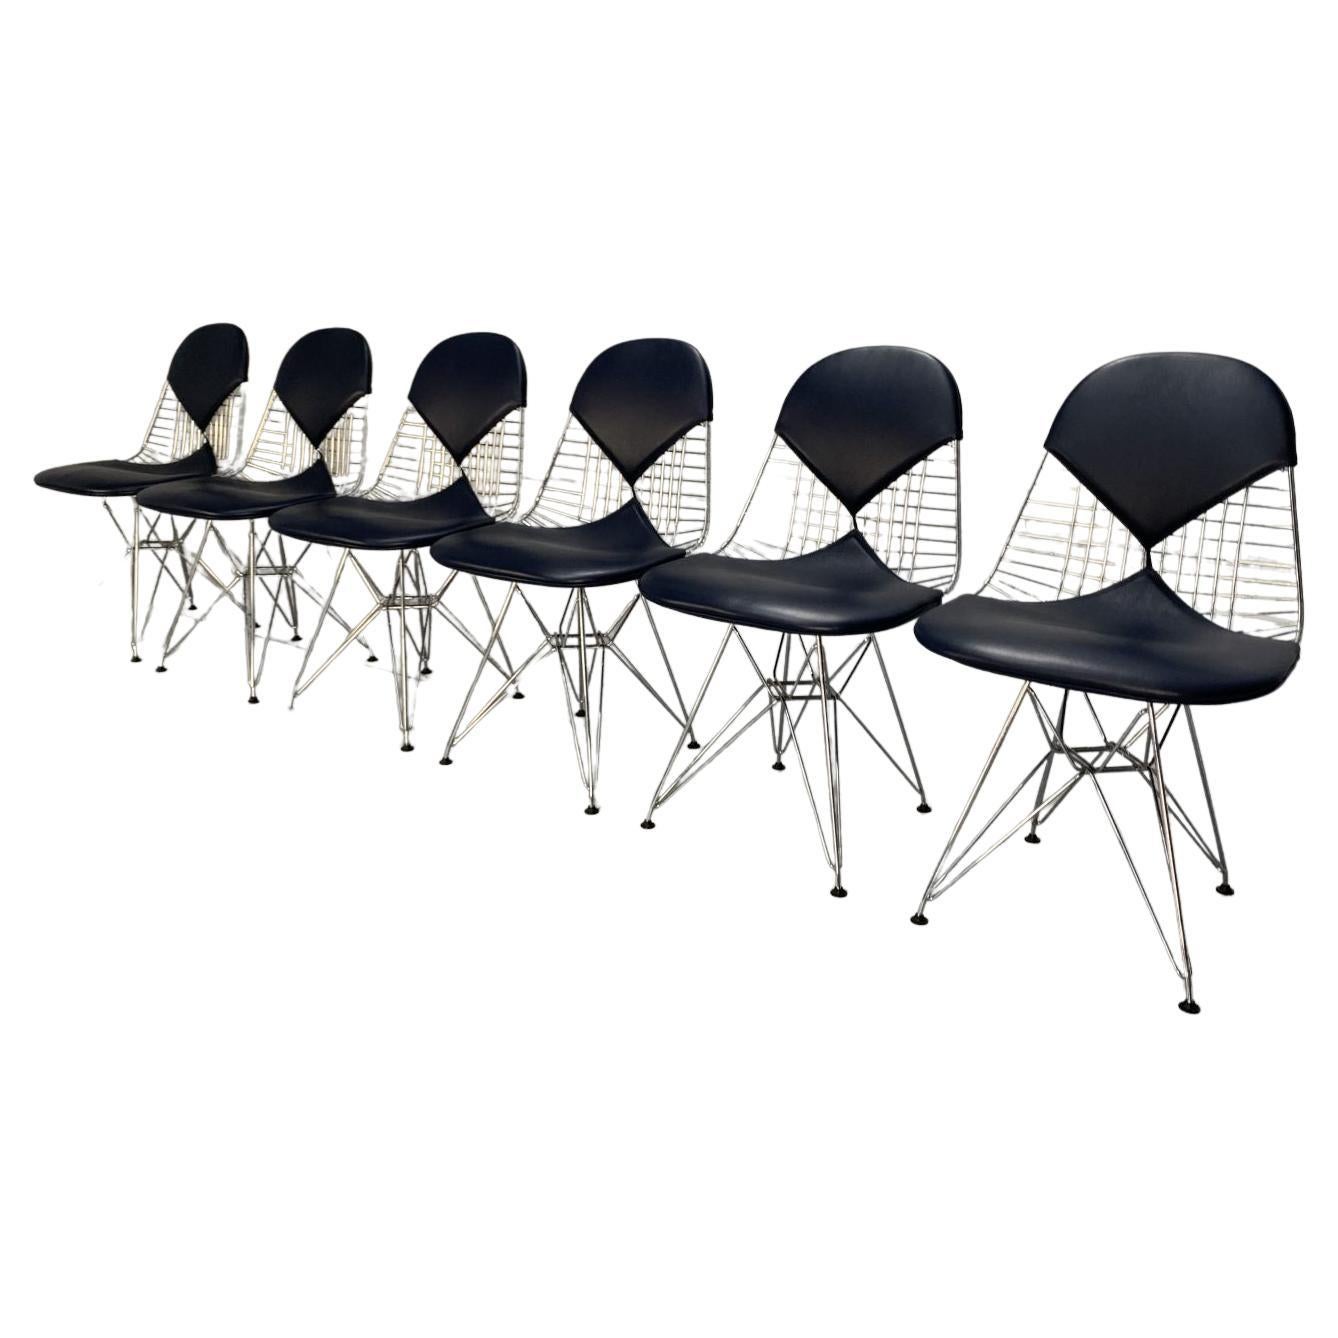 Suite of 6 Vitra “Eames DKR-2 Bikini” Chairs in Navy Blue Premium Leather